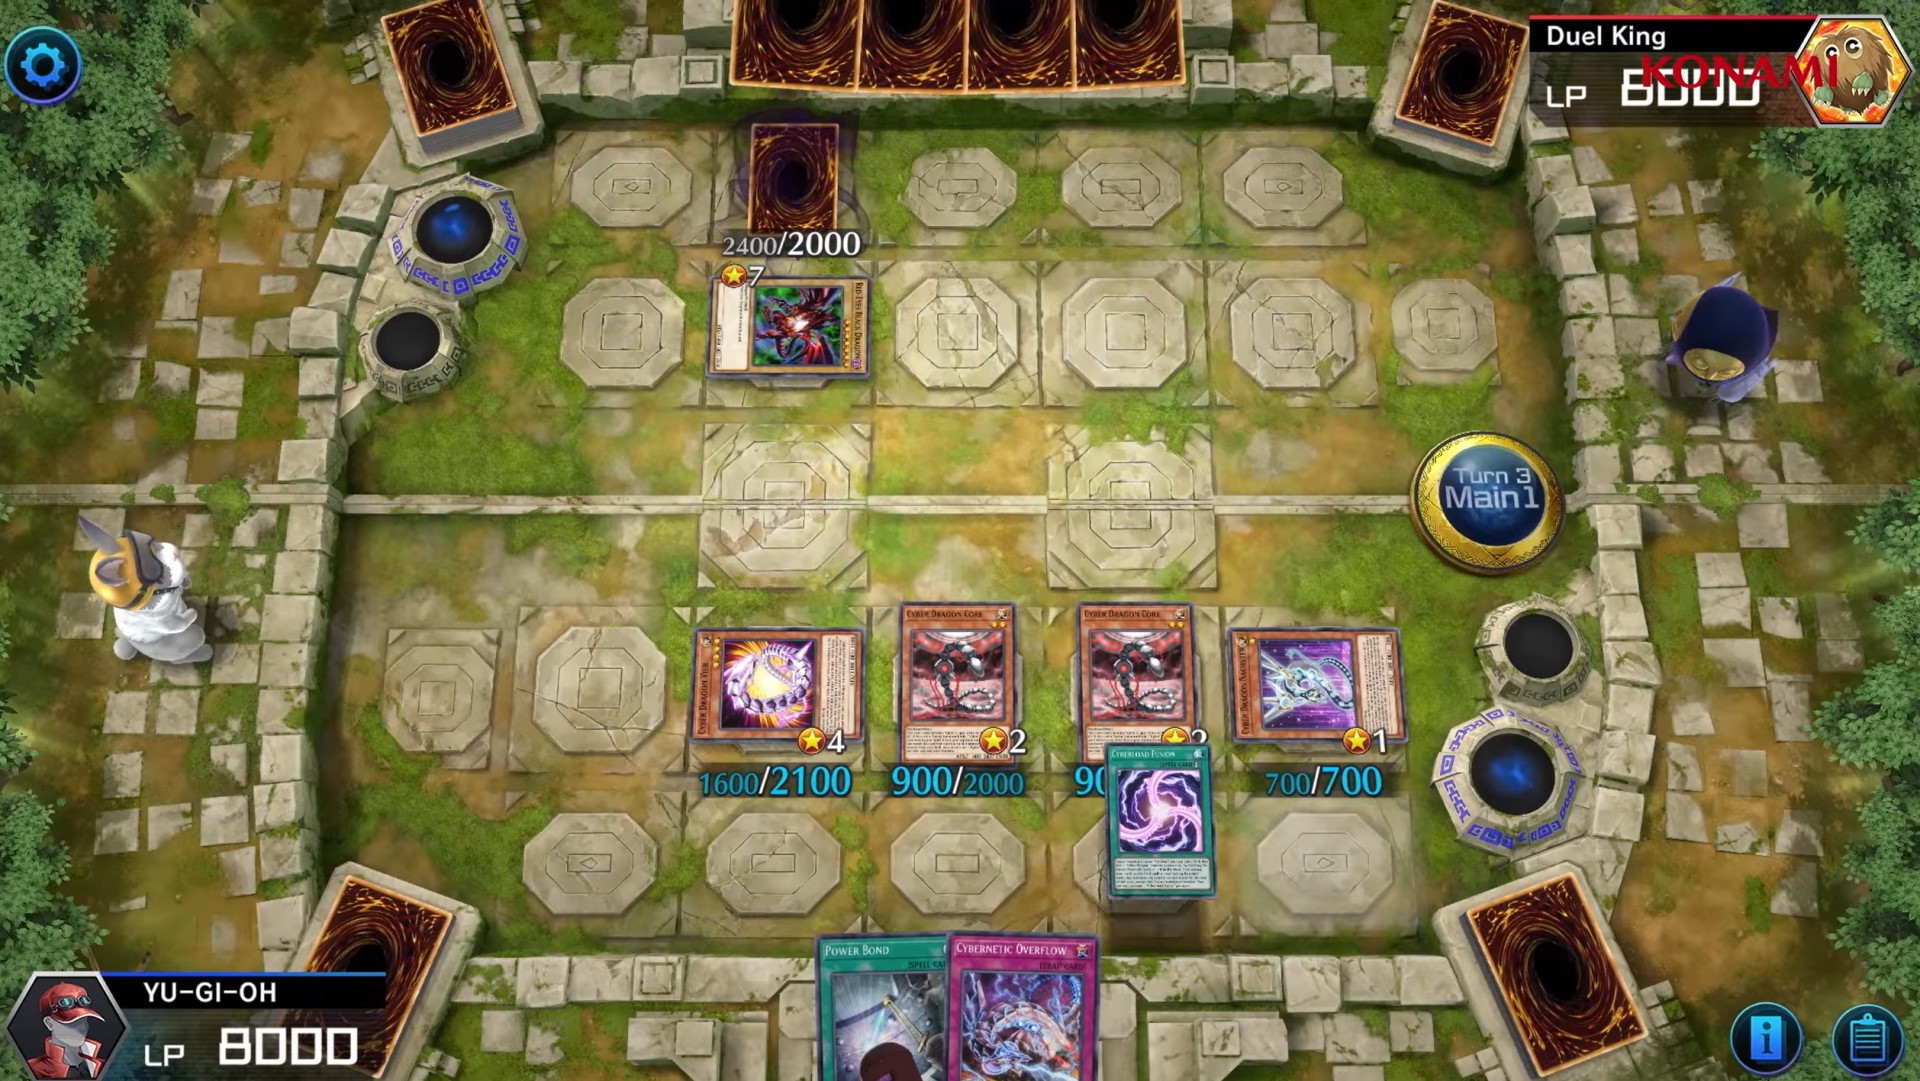 YuGiOh Master Duel banlist - digital duelling field with cards on